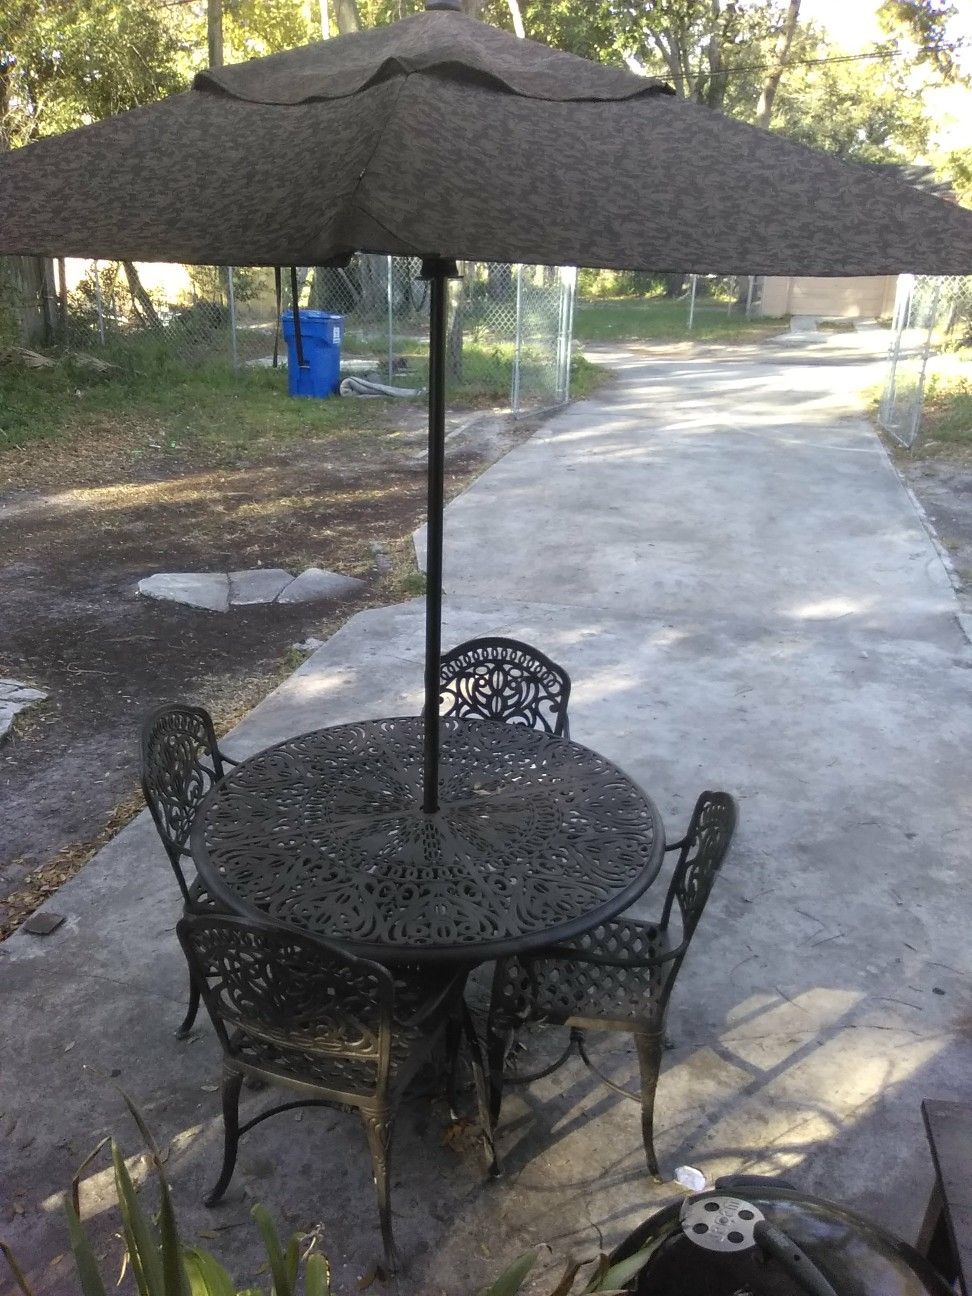 Patio set for $150 comes with the umbrella